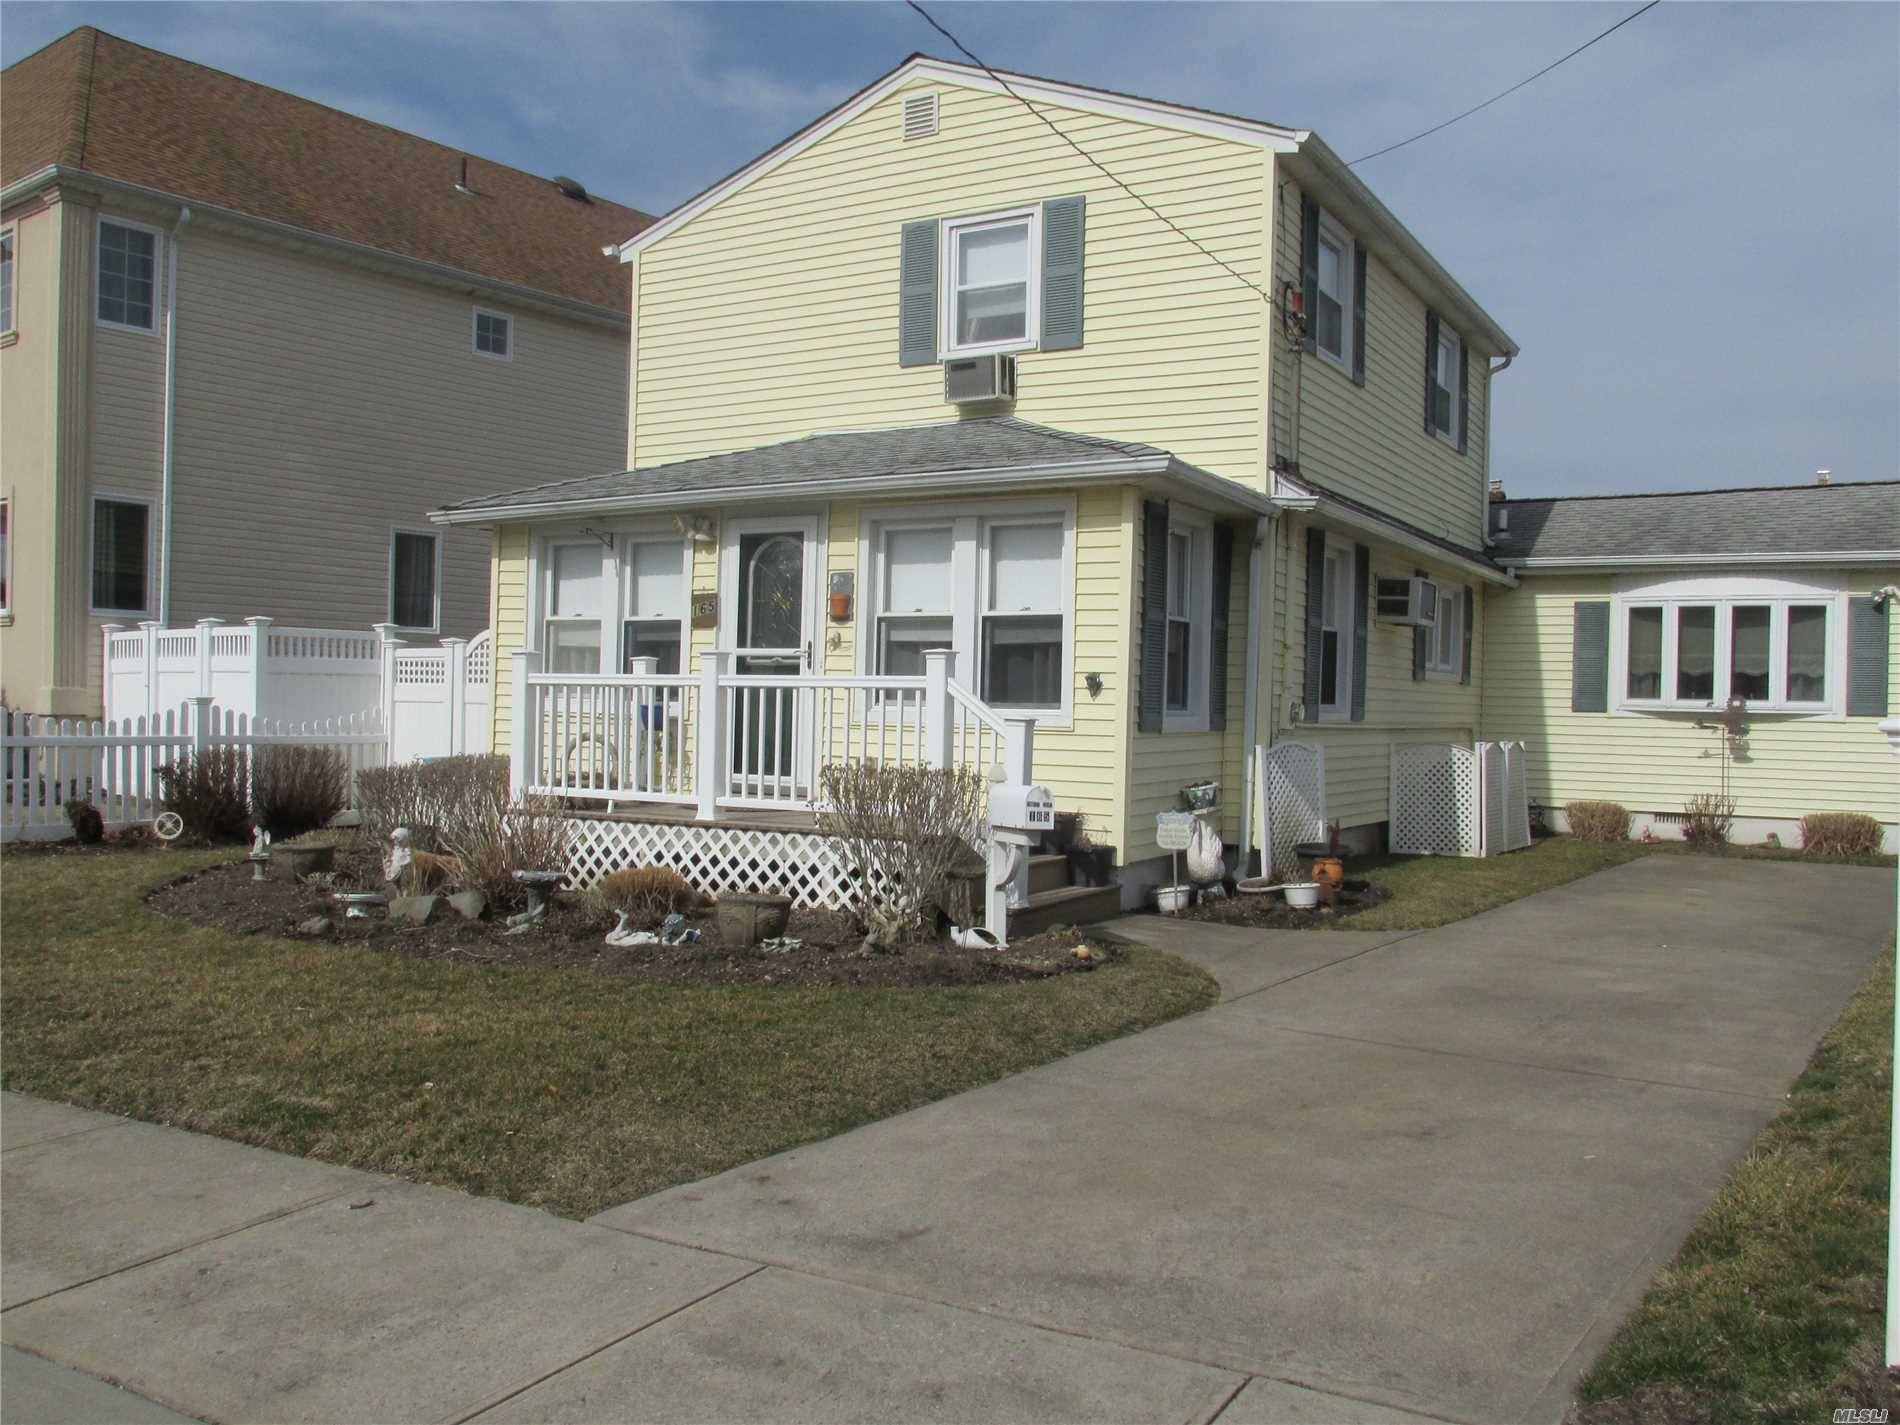 MOVE WRIGHT IN TO THIS BEAUTIFUL COMPLETELY RENOVATED 2 BEDROOM 2 BATH COLONIAL.